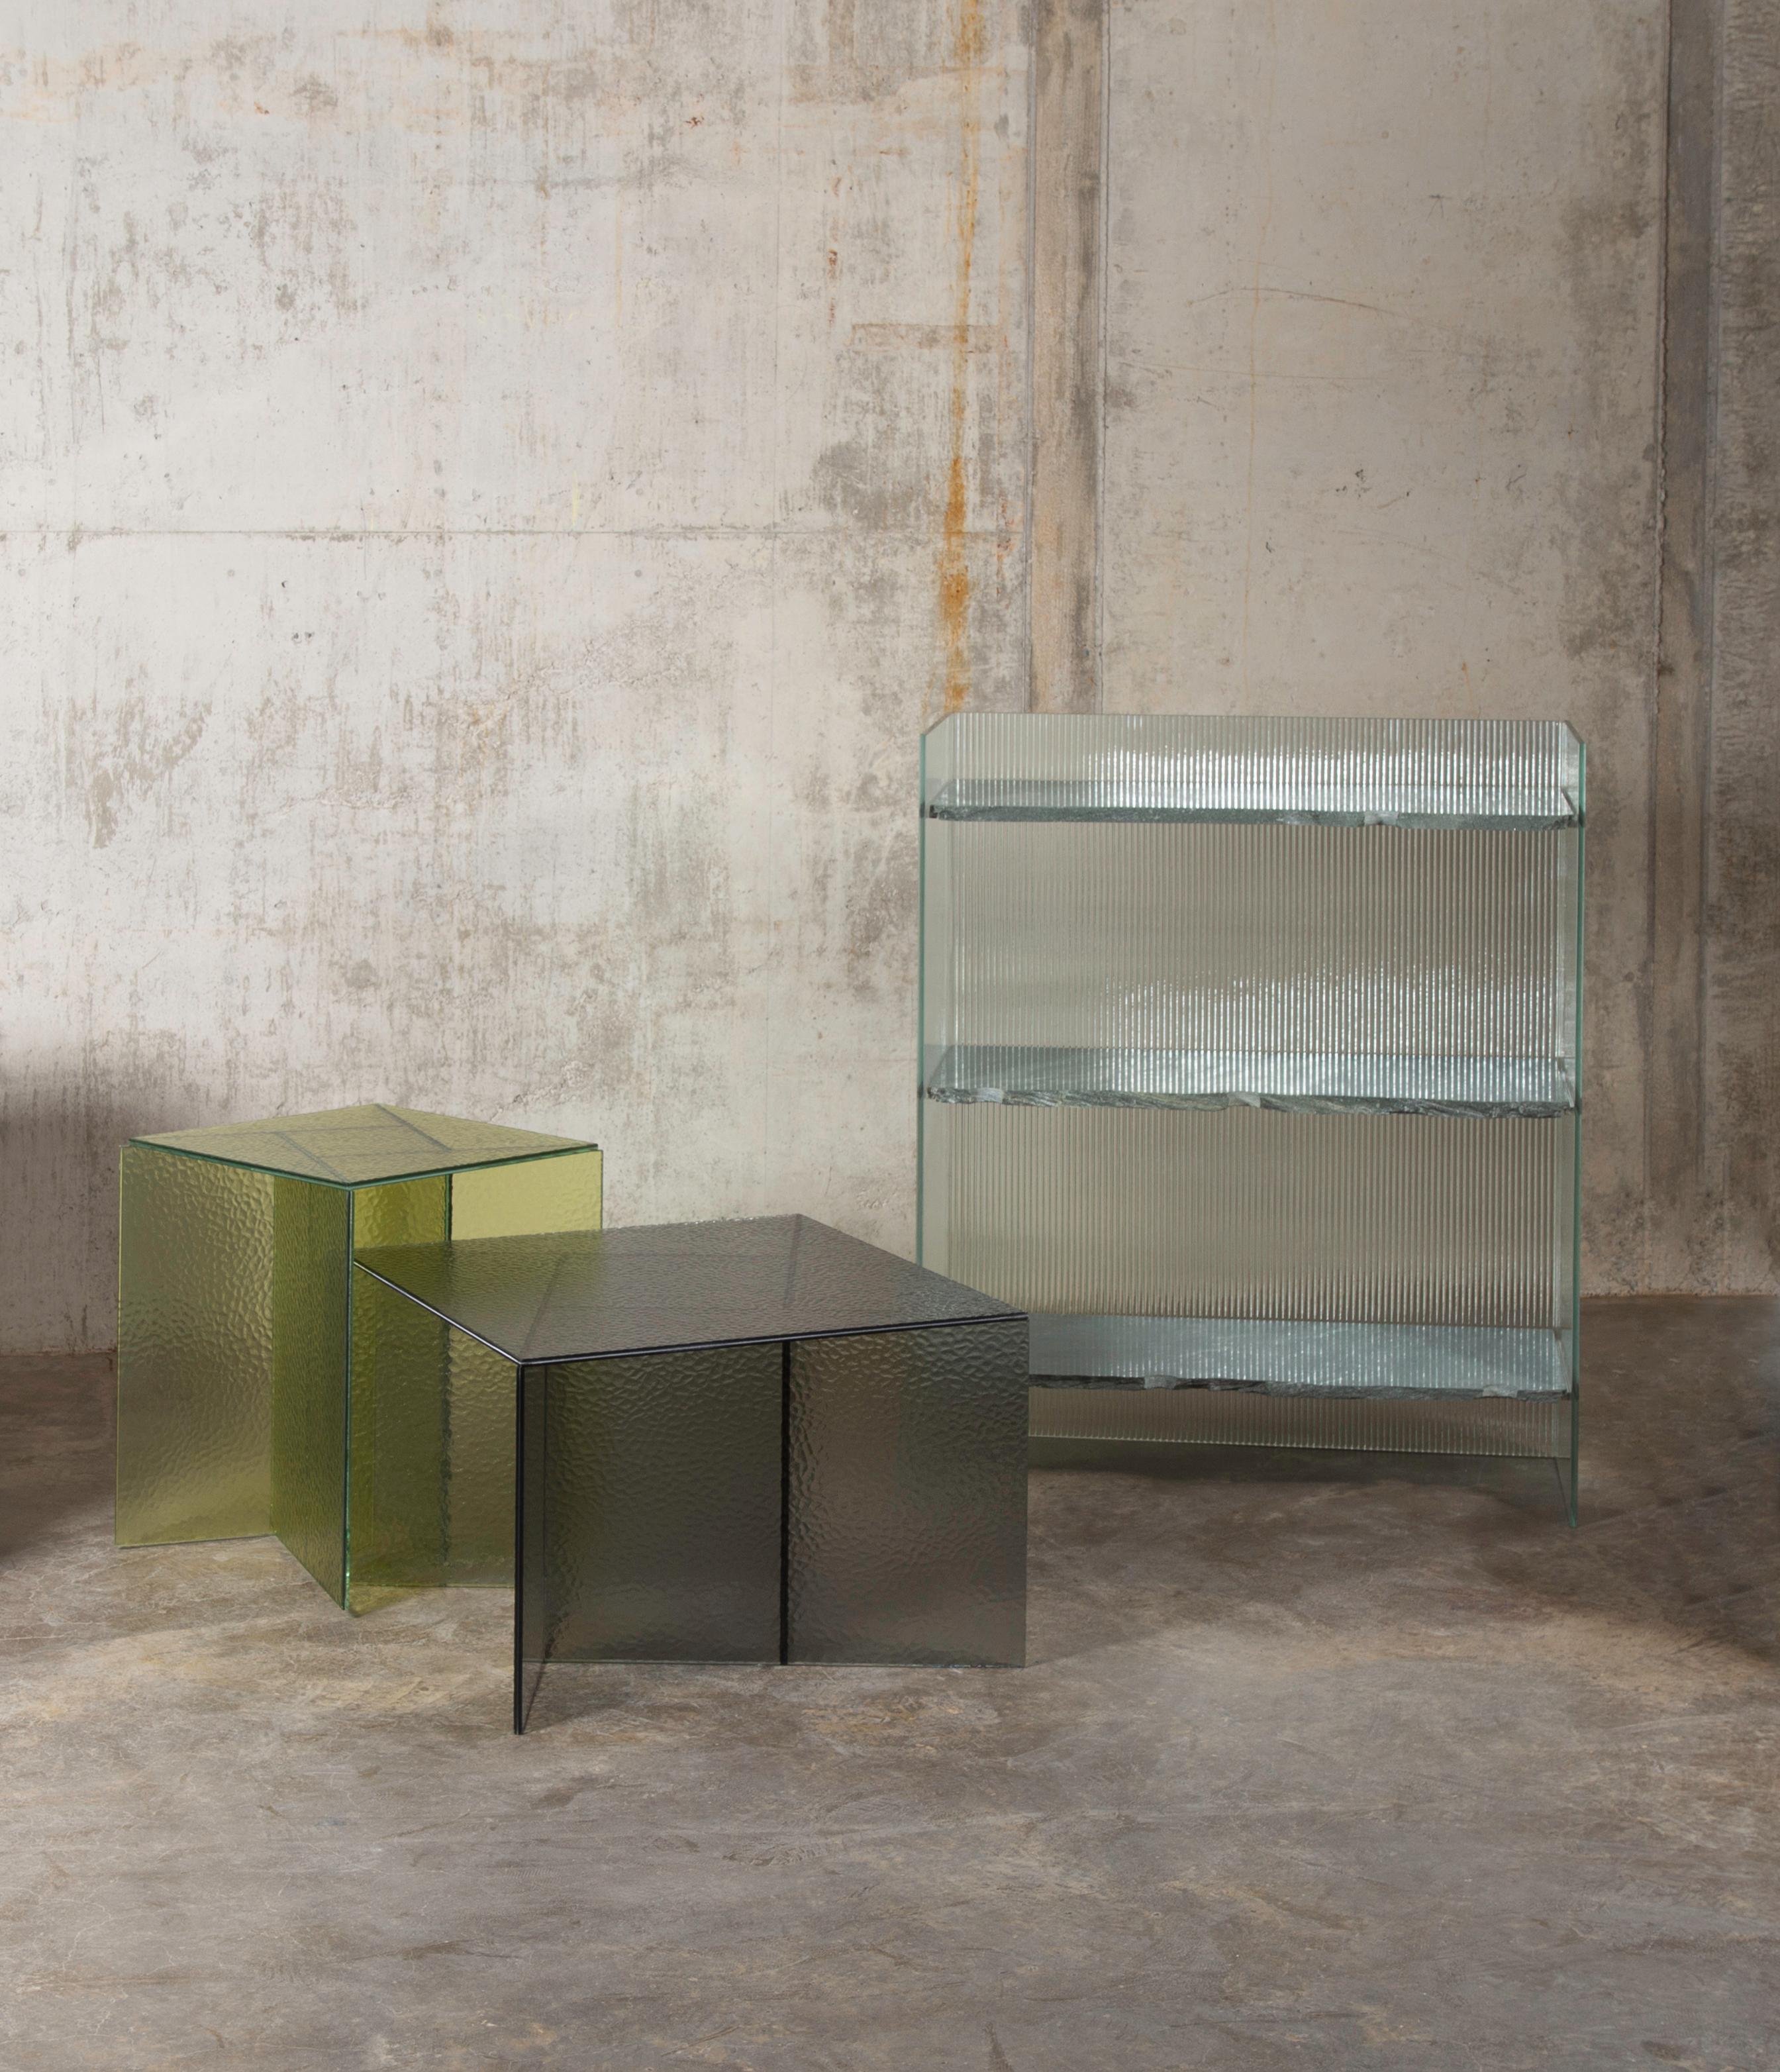 Aspa table big, European, Minimalist, rose, glass, 20th century, German, table

Variety is a pleasure. aspa, the side table concept from the Spanish design studio MUT, is a simple study in geometry. Five cathedral glass layers stacked on top of